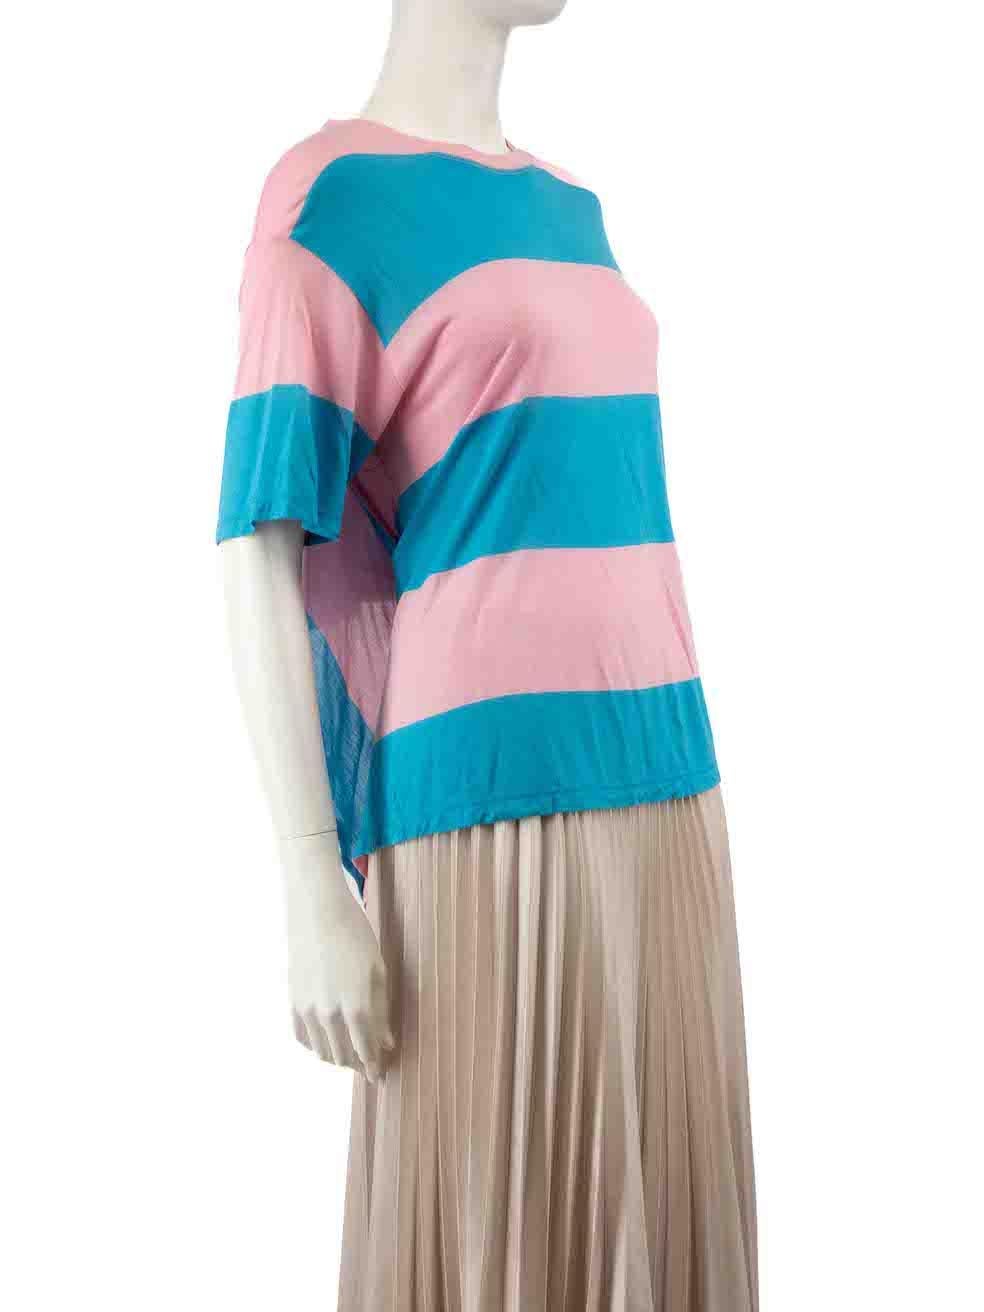 CONDITION is Very good. Hardly any visible wear to t-shirt is evident on this used Diane Von Furstenberg designer resale item.
 
 
 
 Details
 
 
 Blue and pink
 
 Viscose
 
 Short sleeves top
 
 Striped pattern
 
 Round neckline
 
 Tie back detail
